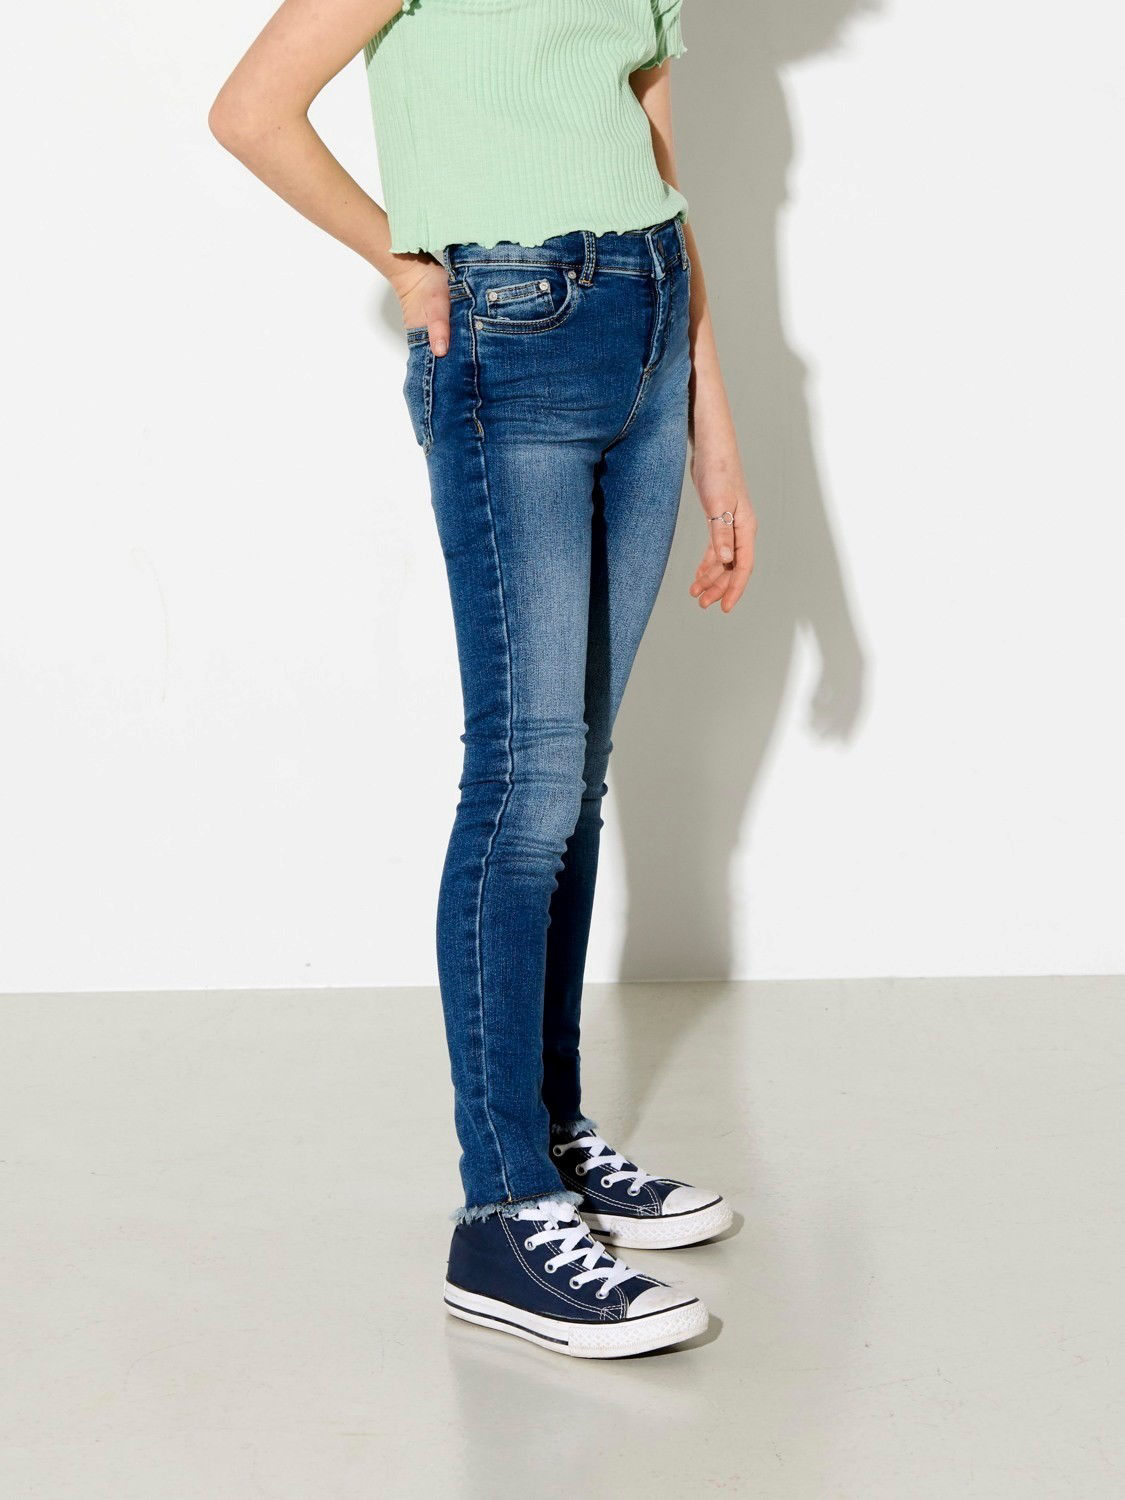 ONLY Female Skinny Fit Jeans KONBlush